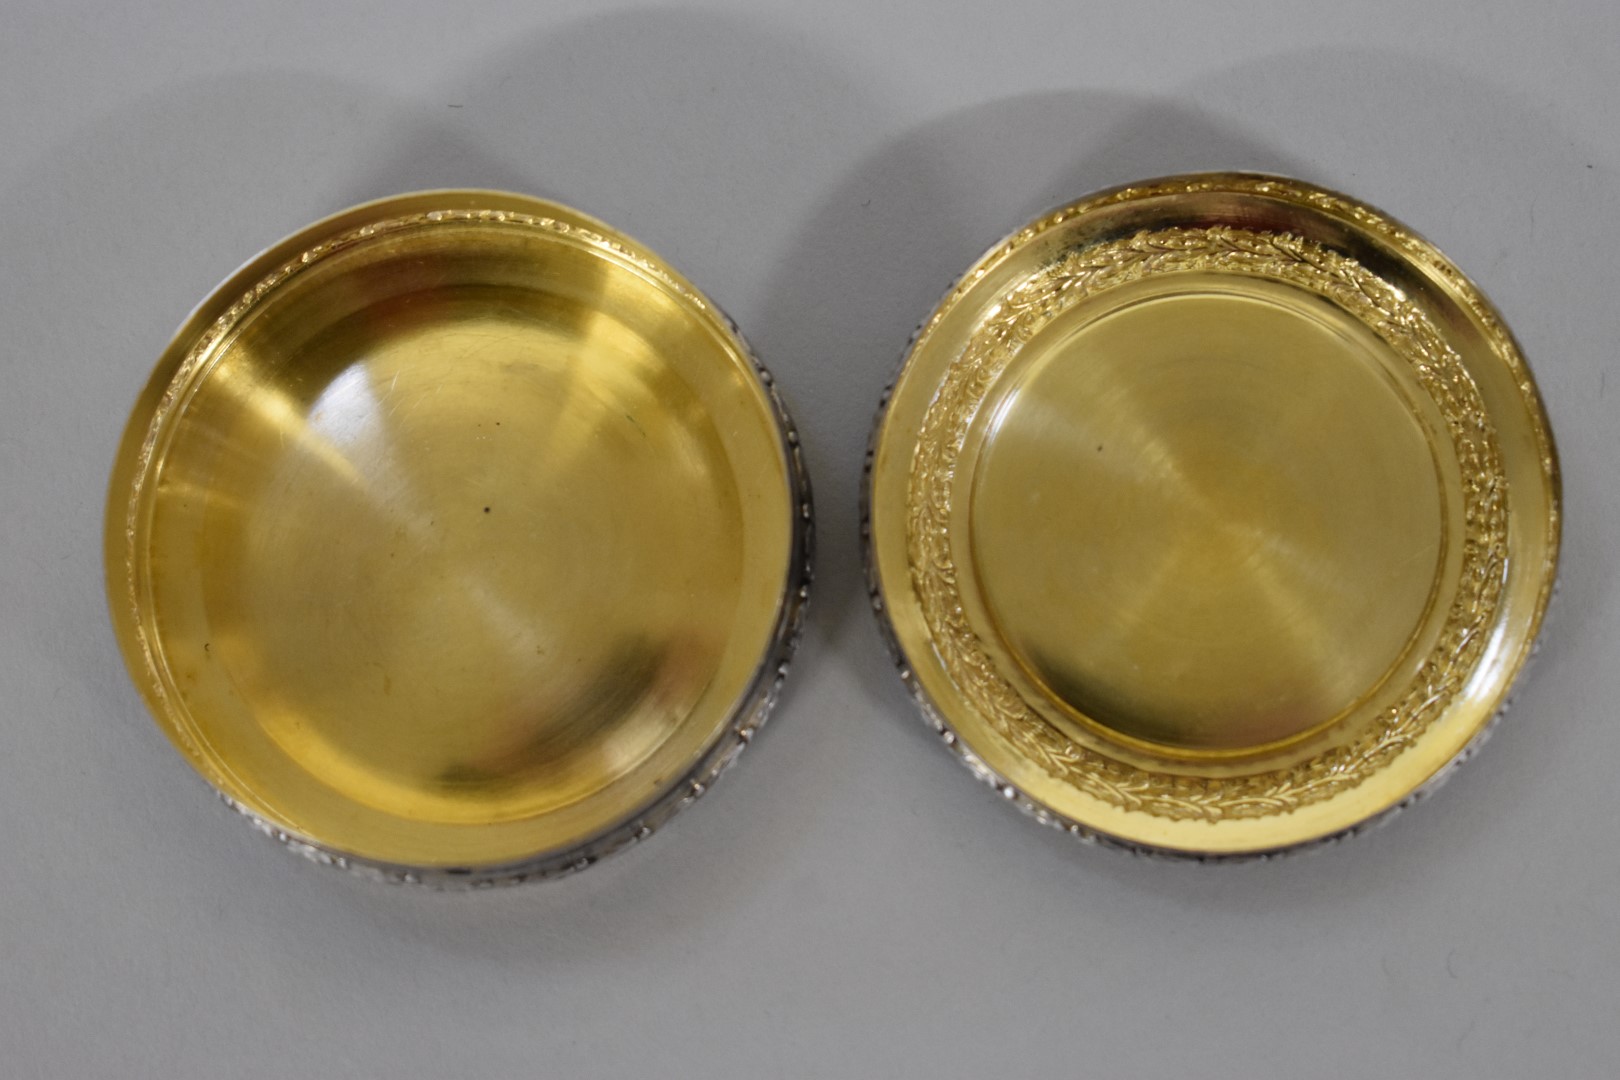 A French silver gilt snuff box,Â by Edouard Clerc, the lid setÂ porcelain plaque depicting - Image 3 of 3